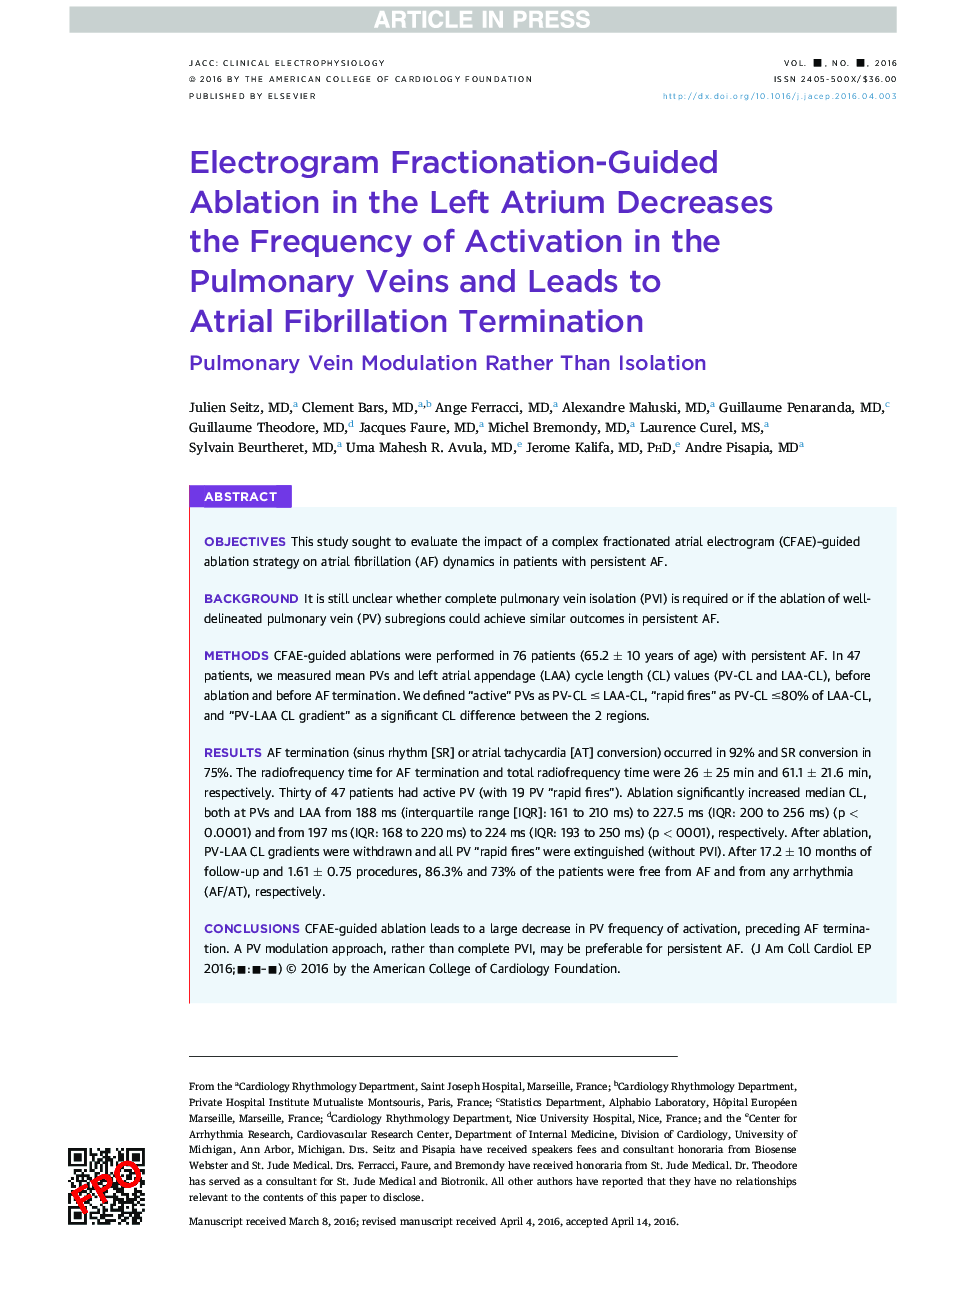 Electrogram Fractionation-Guided Ablation in the Left Atrium Decreases theÂ Frequency of Activation in the Pulmonary Veins and Leads to AtrialÂ Fibrillation Termination